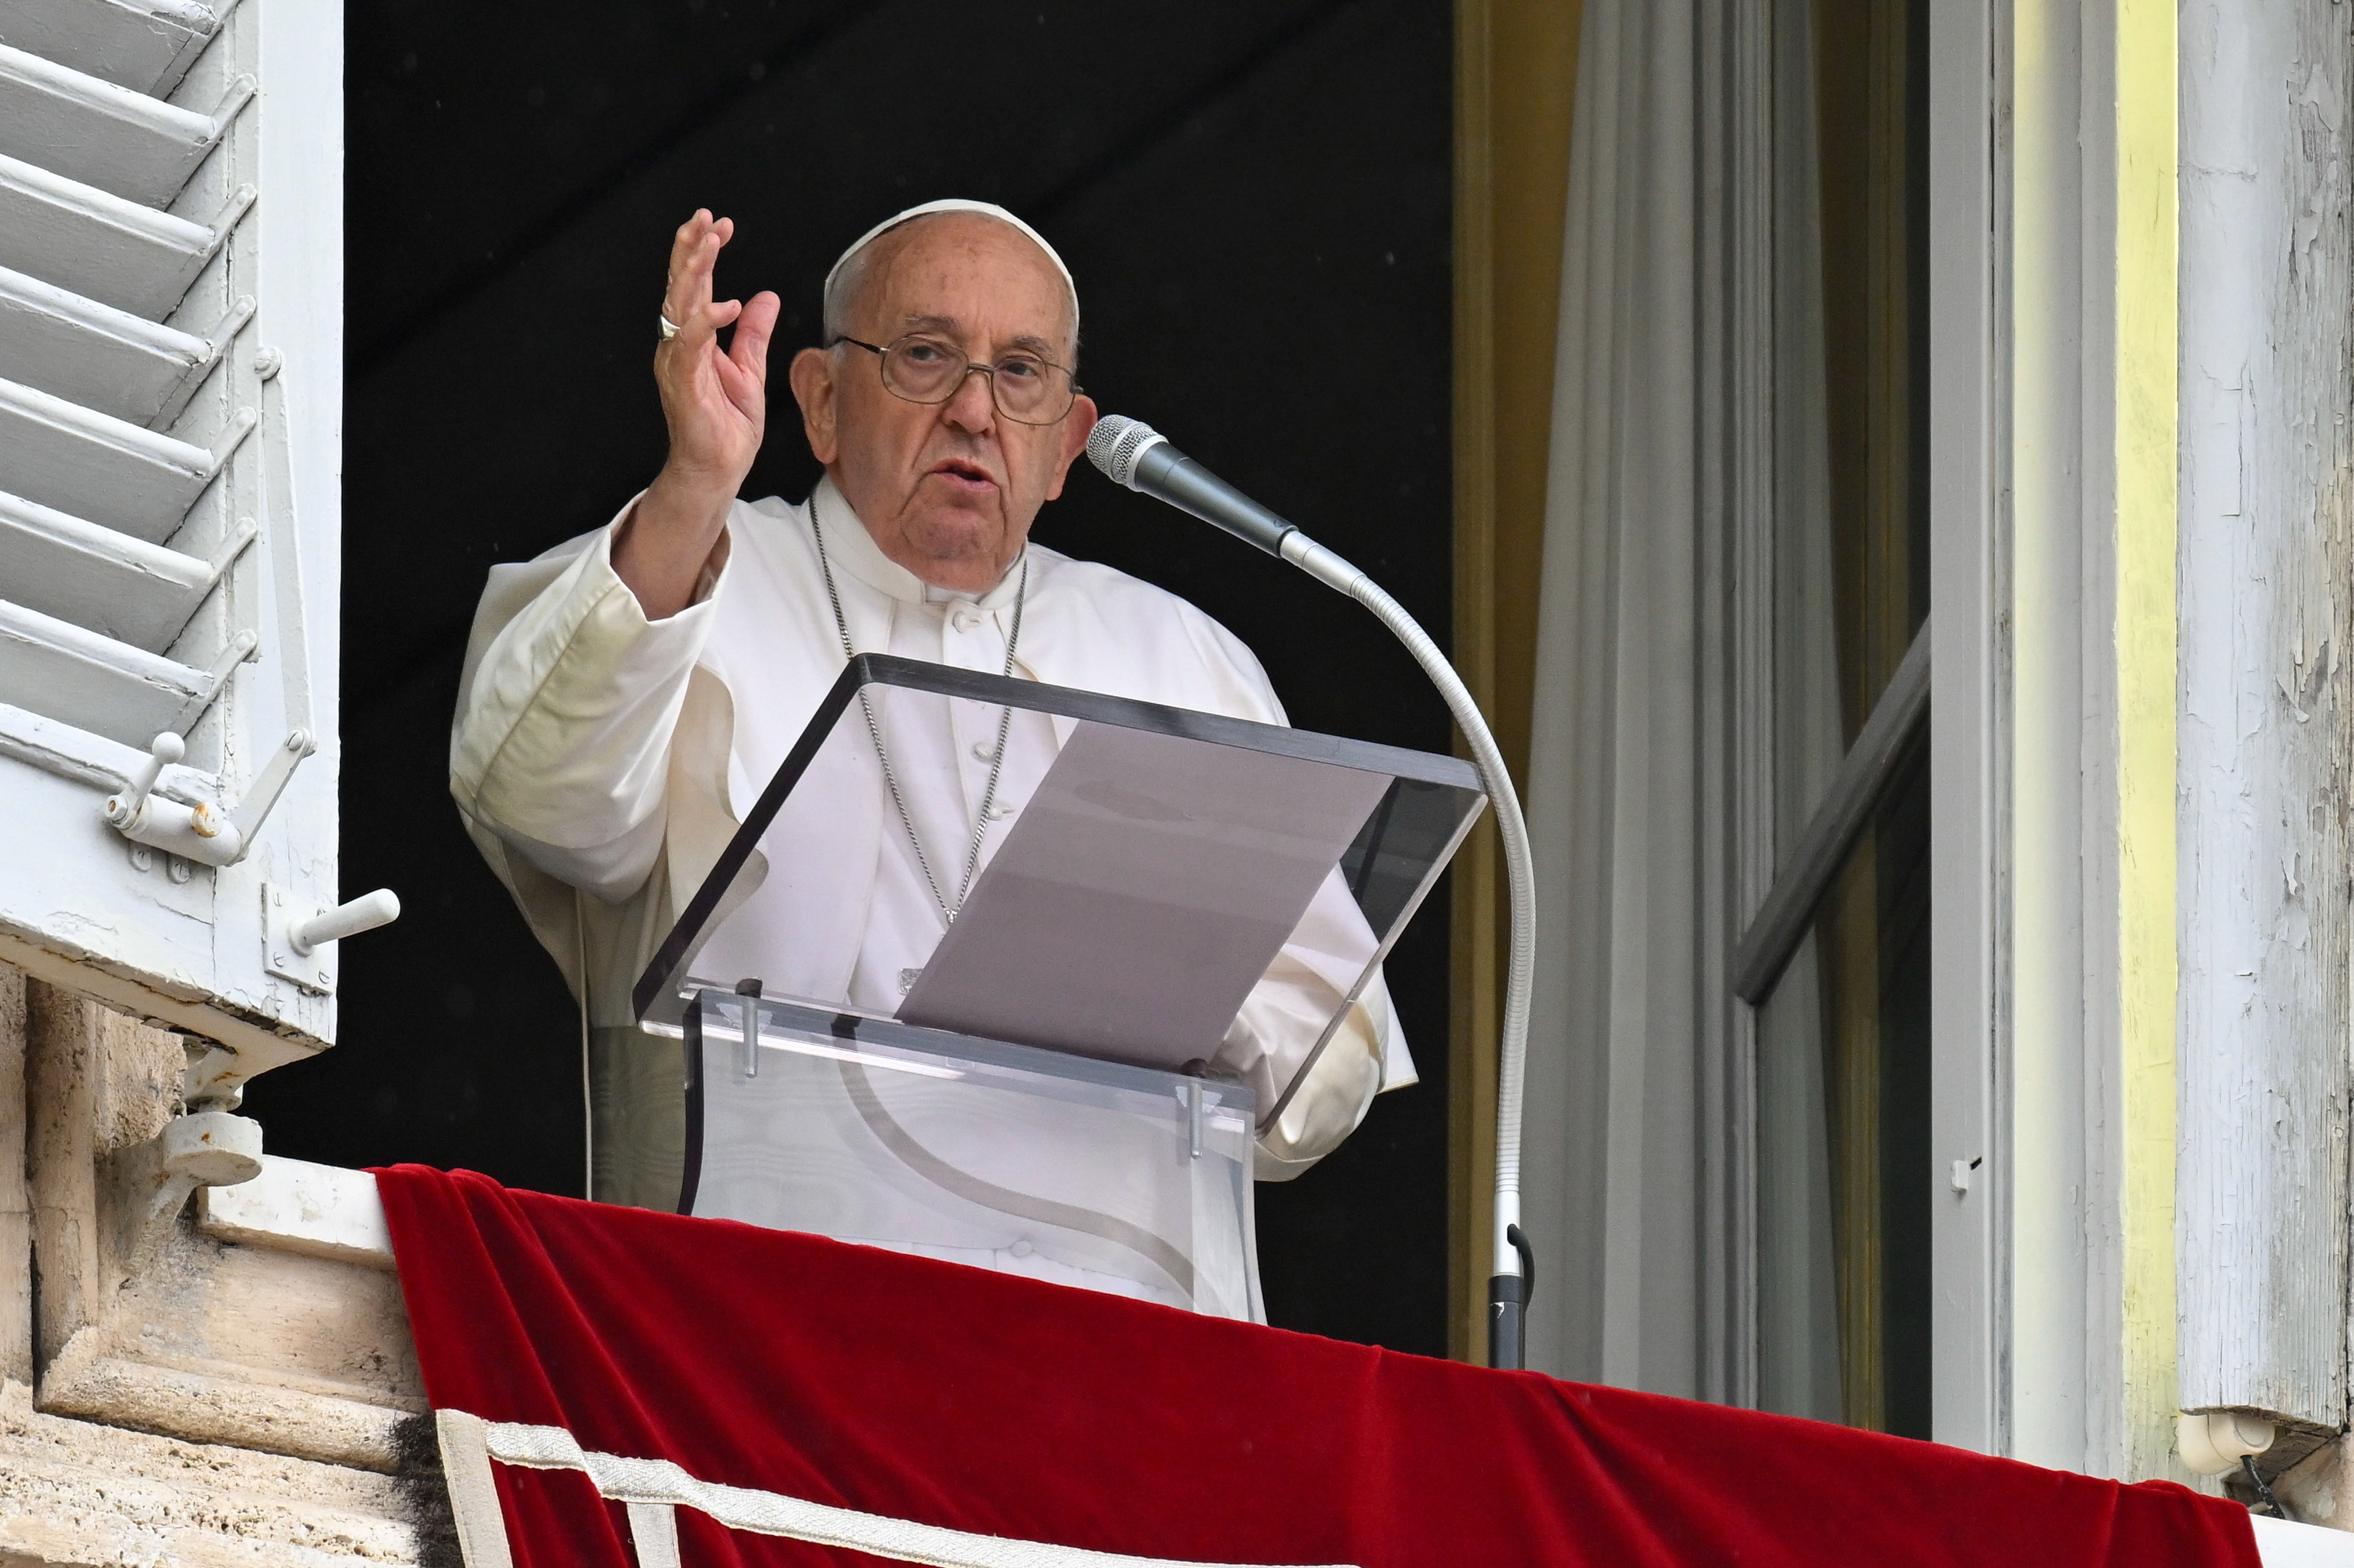 Pope Francis gives his blessing to visitors gathered in St. Peter's Square.